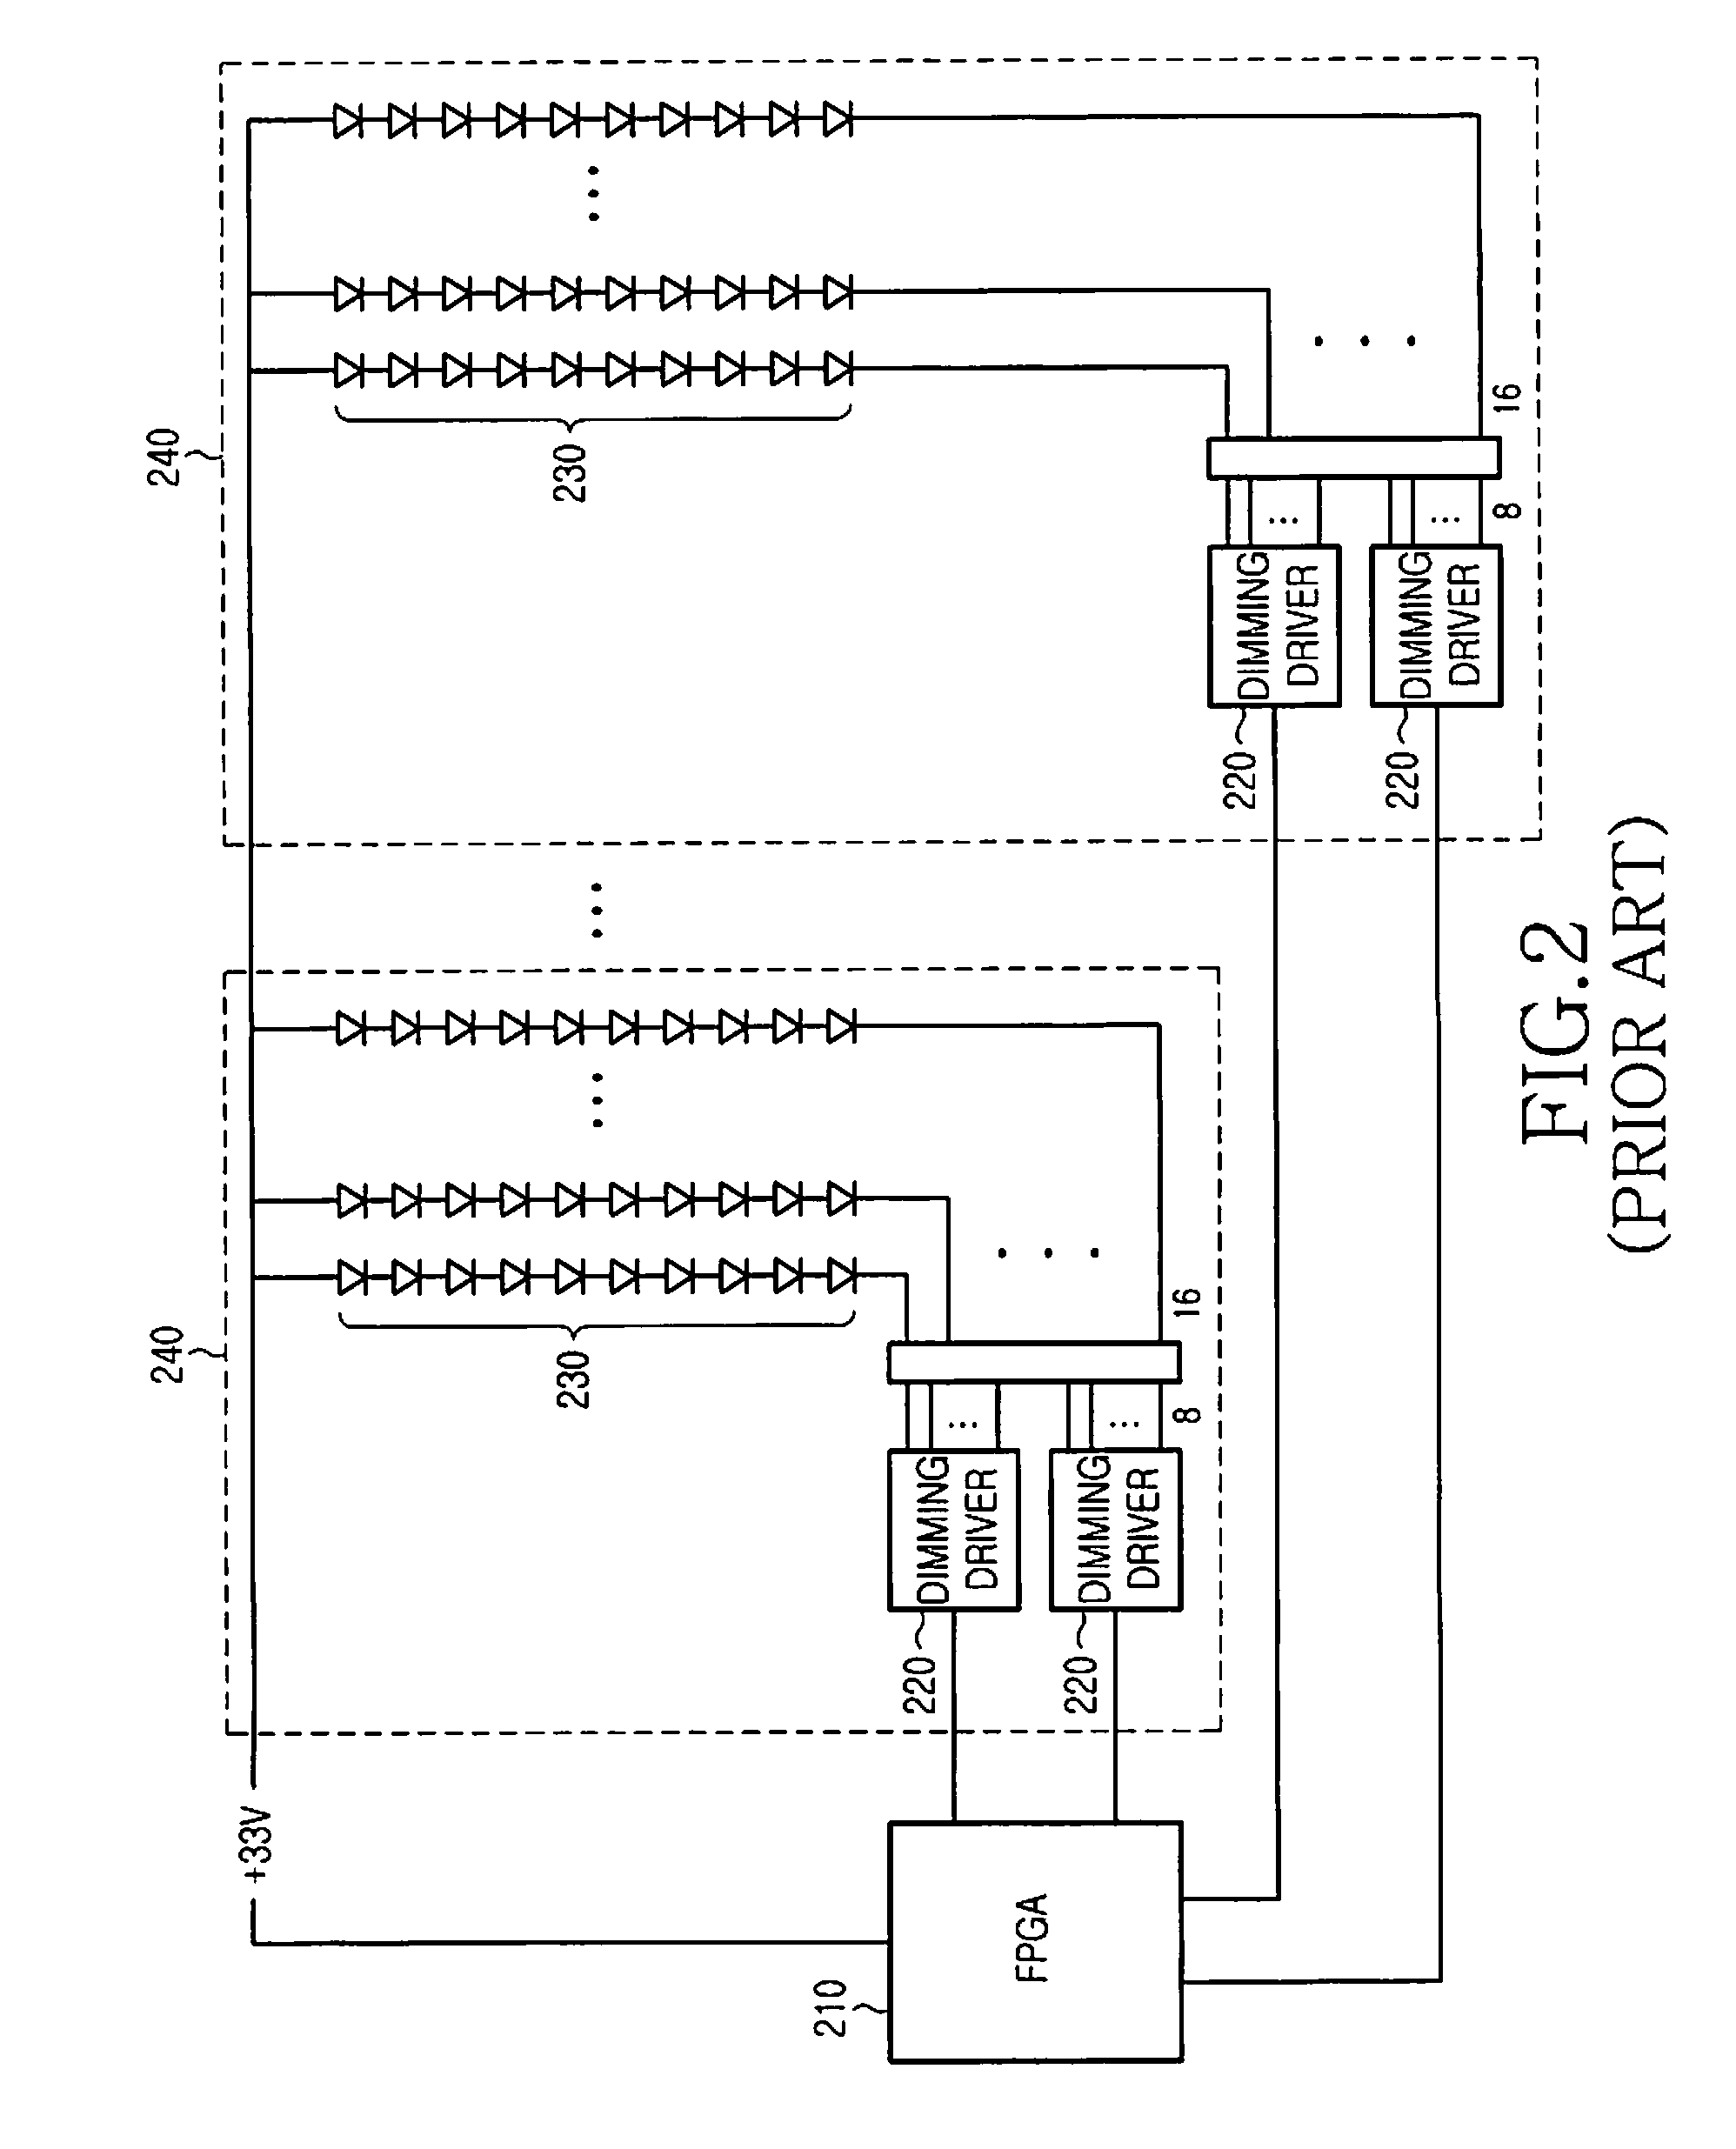 Method and apparatus for providing additional information through display